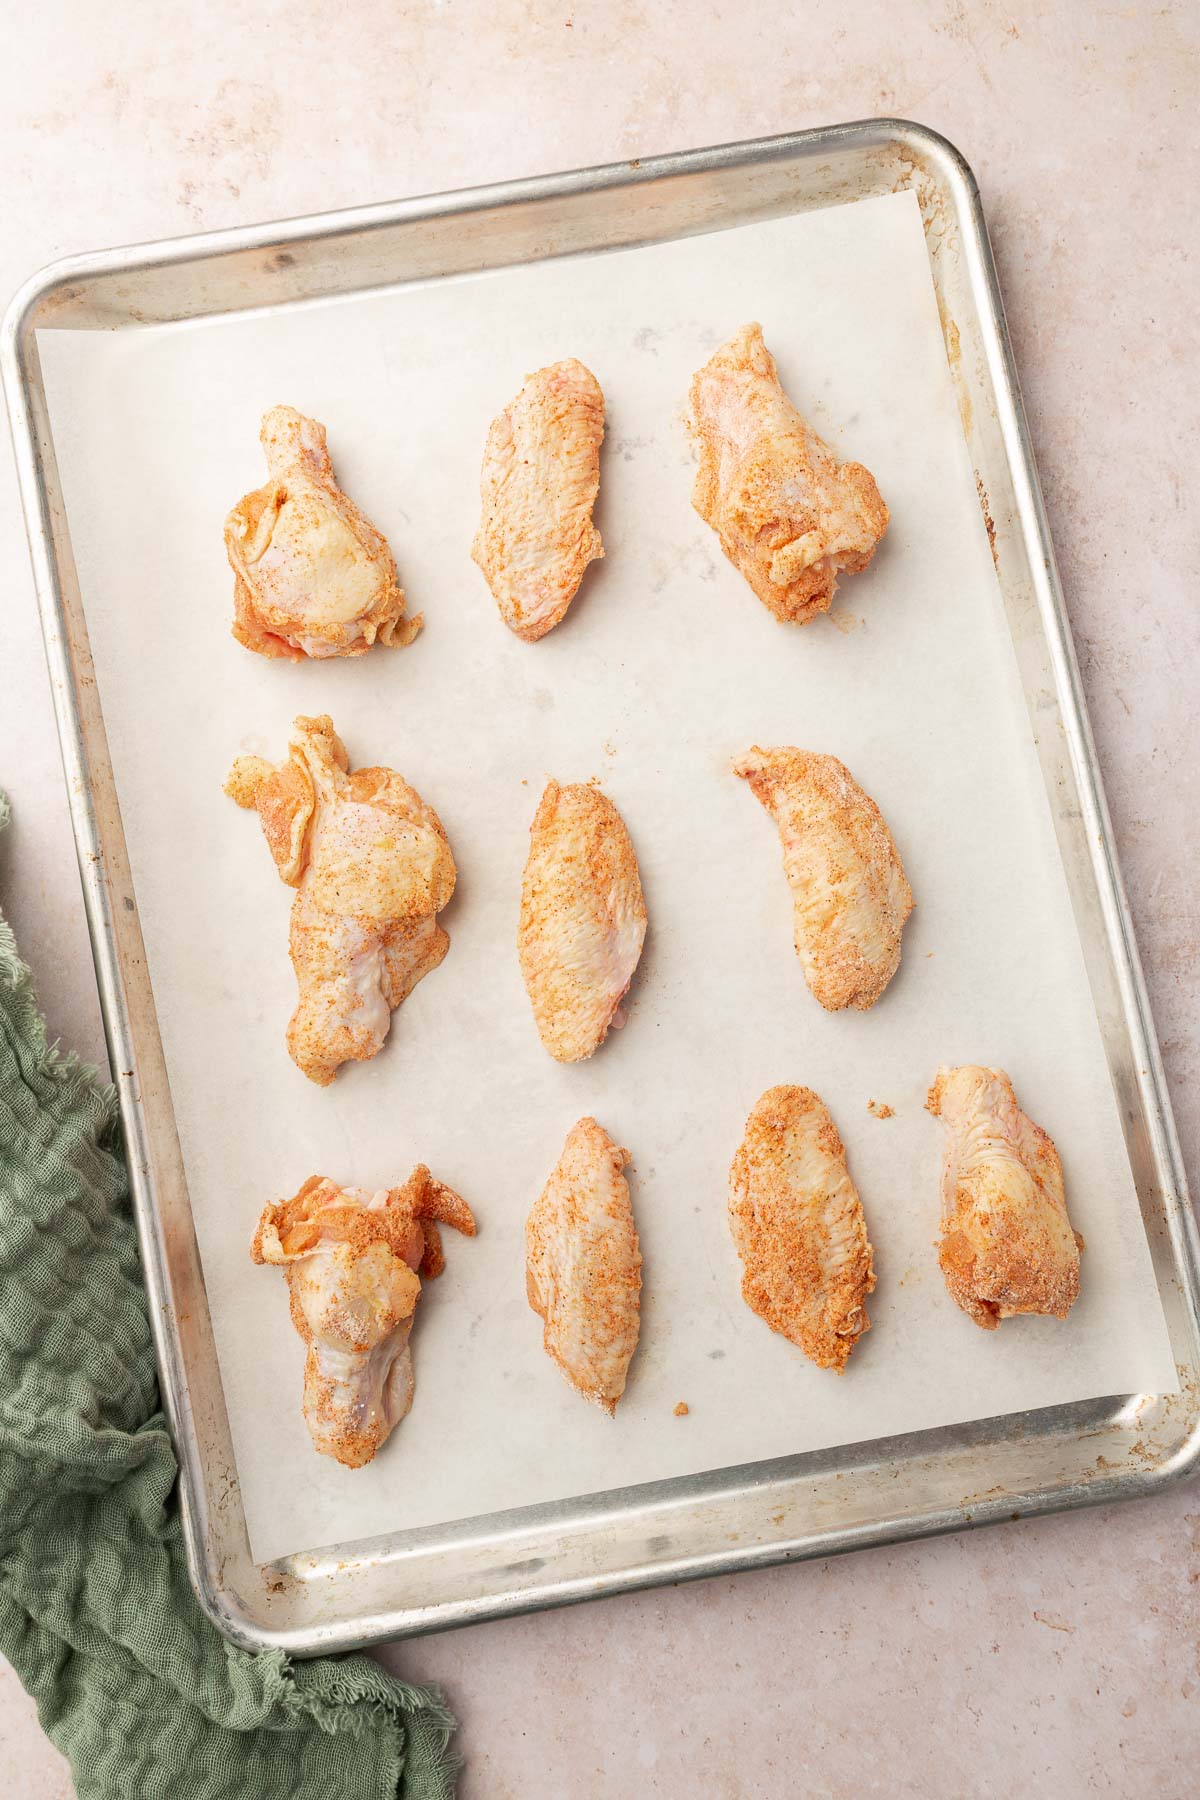 A baking sheet lined with parchment paper and topped with raw chicken wings before baking in the oven.